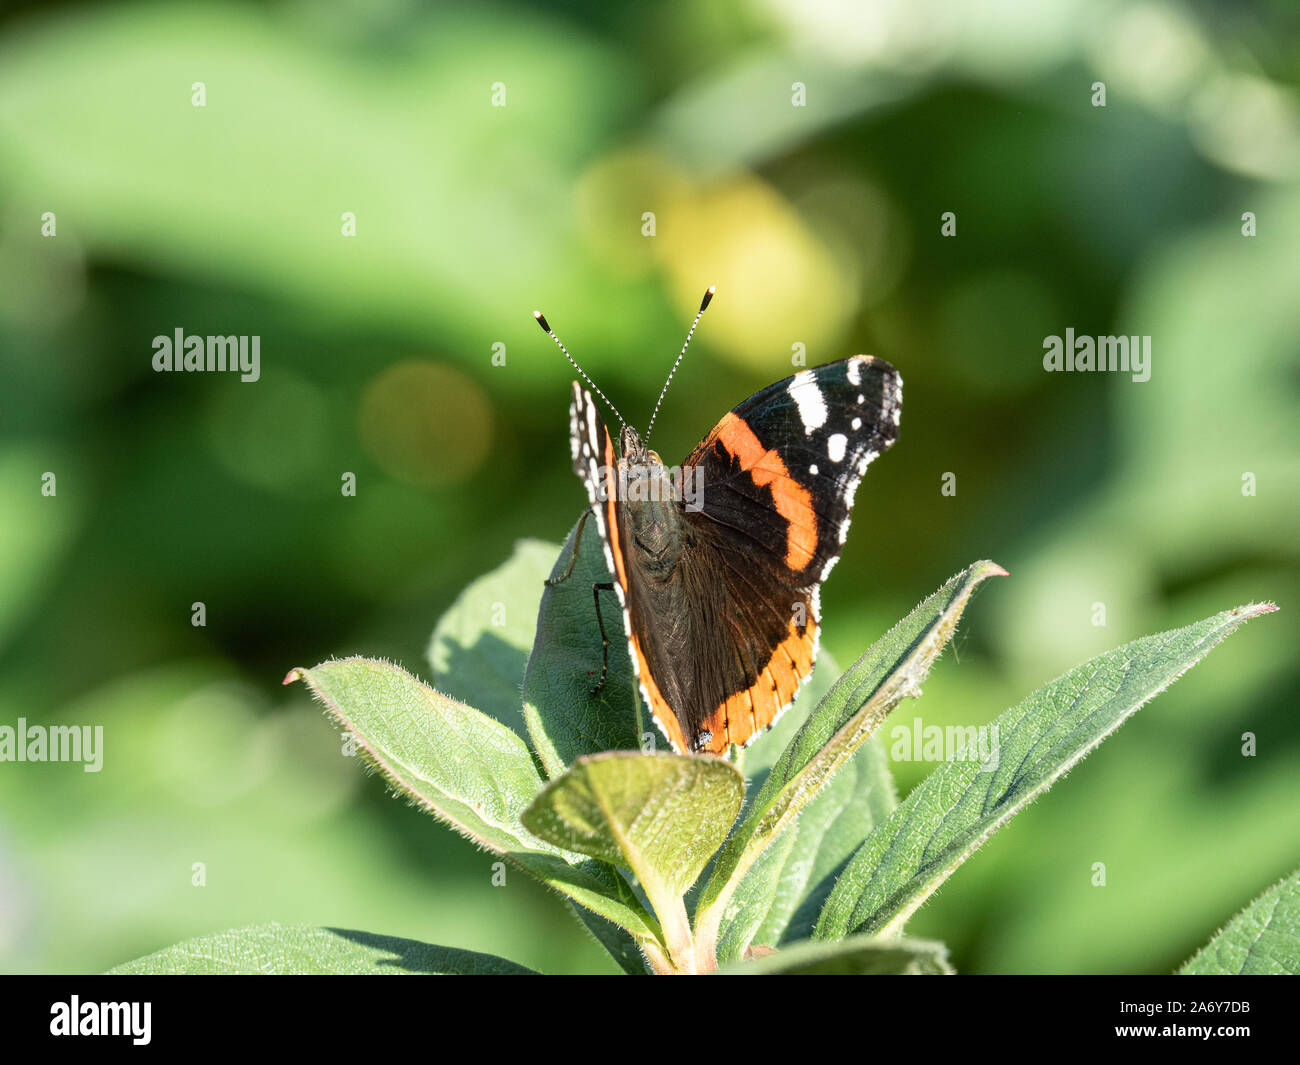 A close up of a red admiral butterfly showing the distinctive wing markings Stock Photo